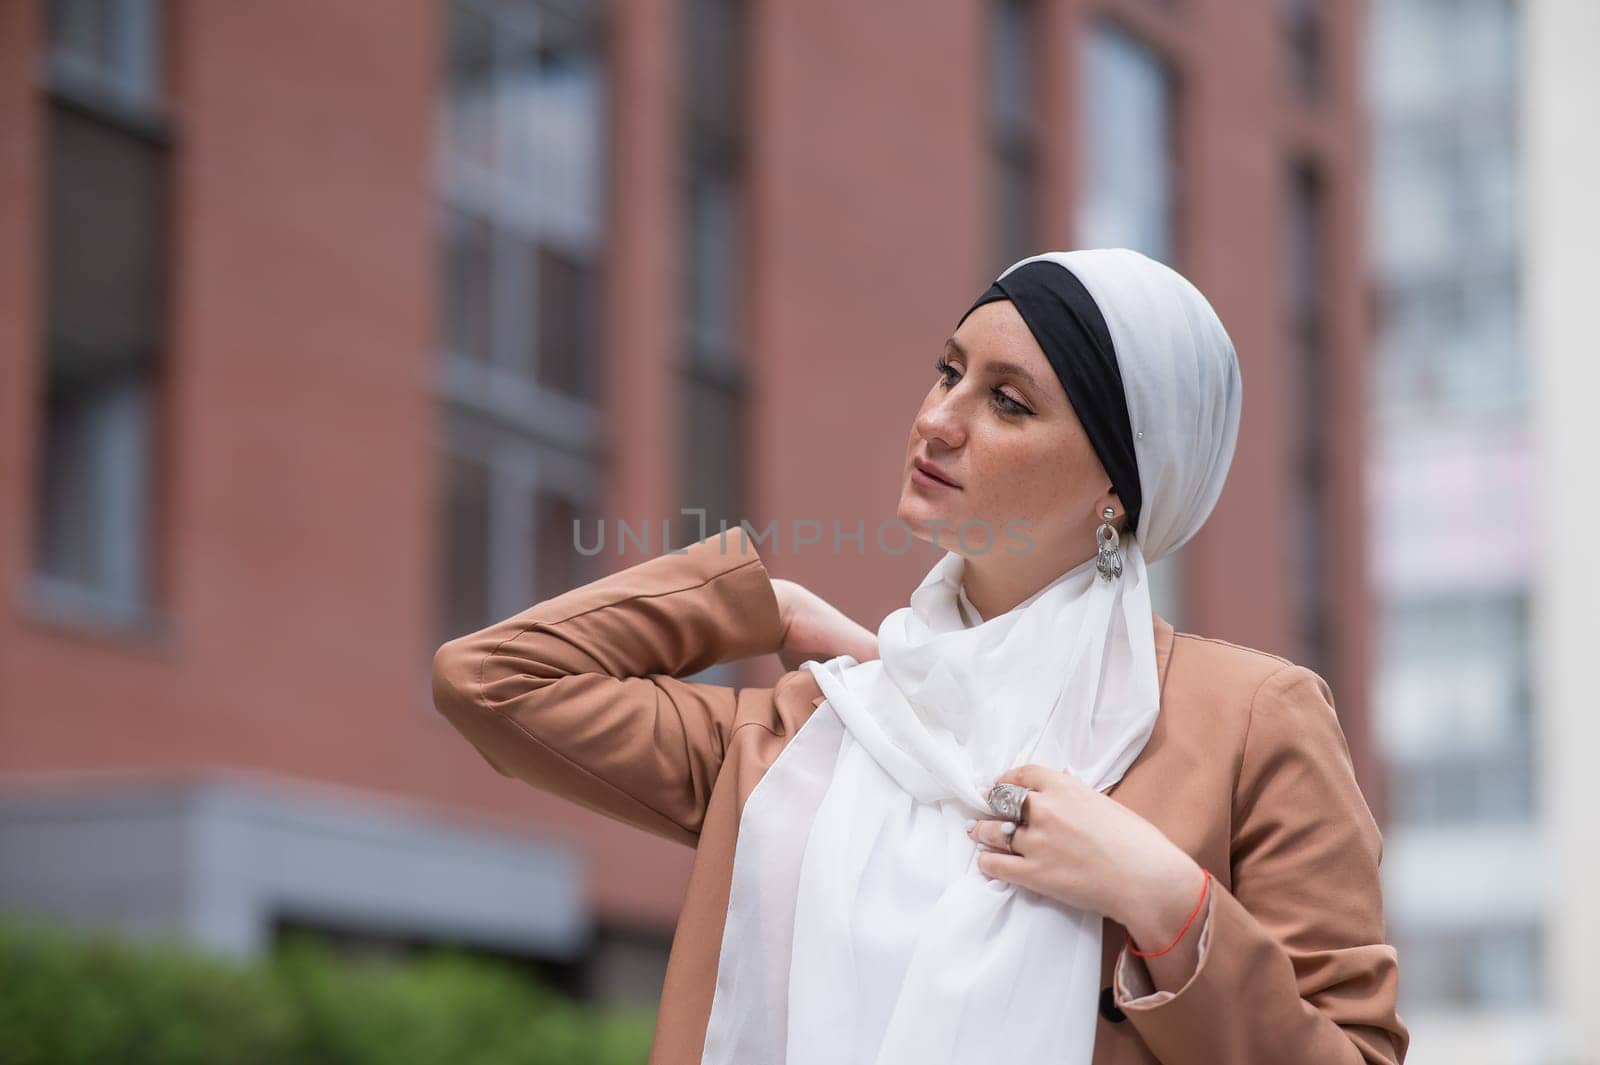 Young woman dressed in hijab and business suit walking outdoors. by mrwed54